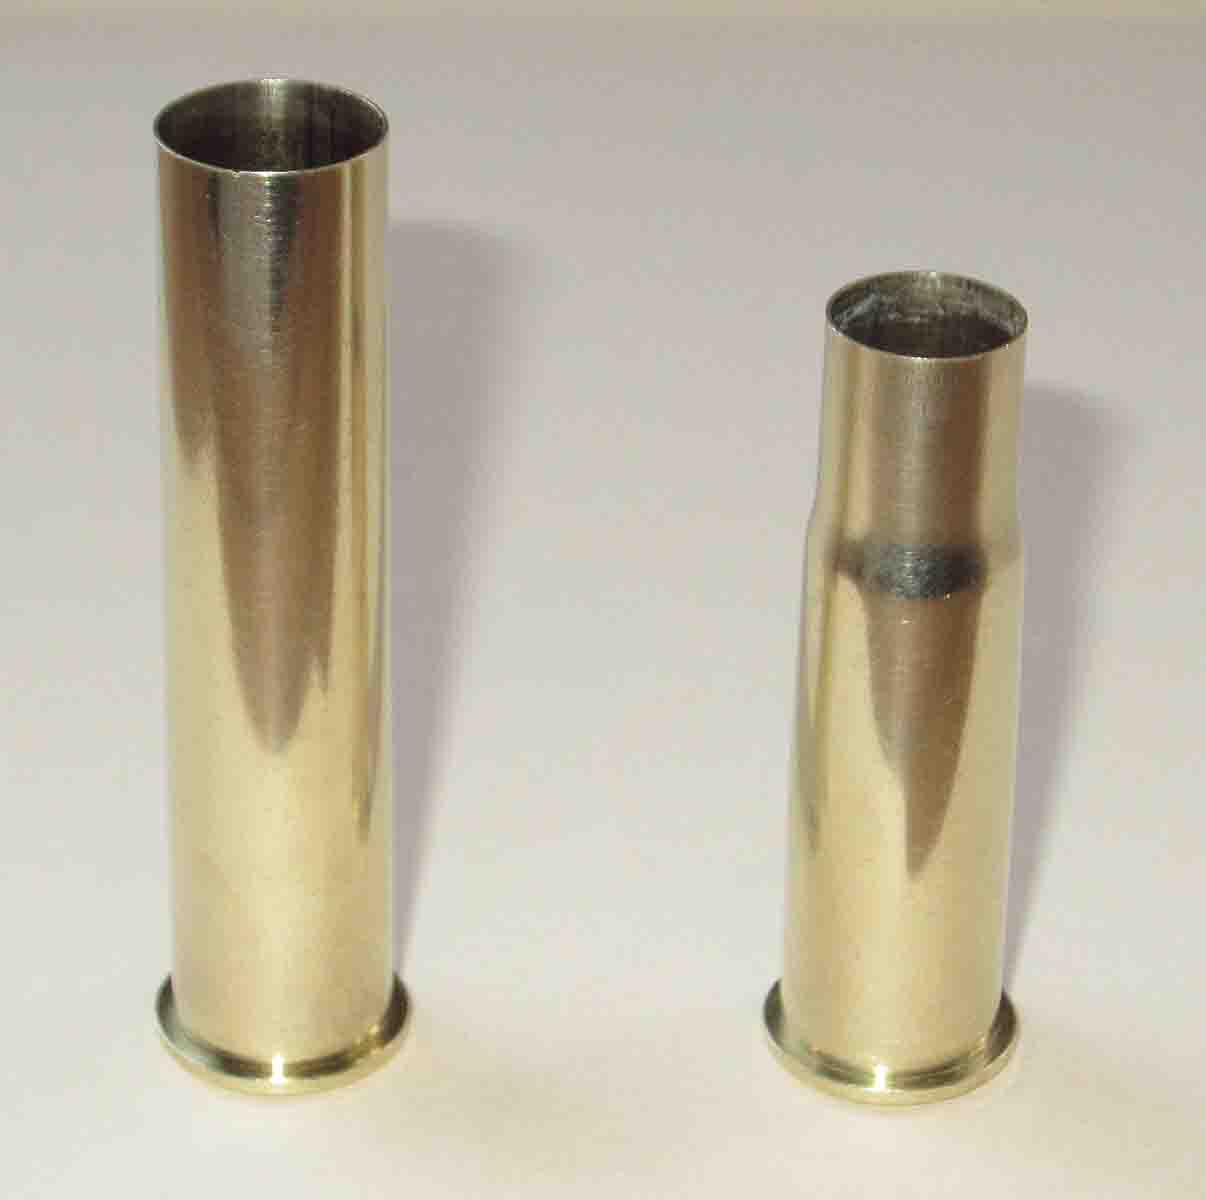 The .50-90 parent with a shortened, partly formed case.